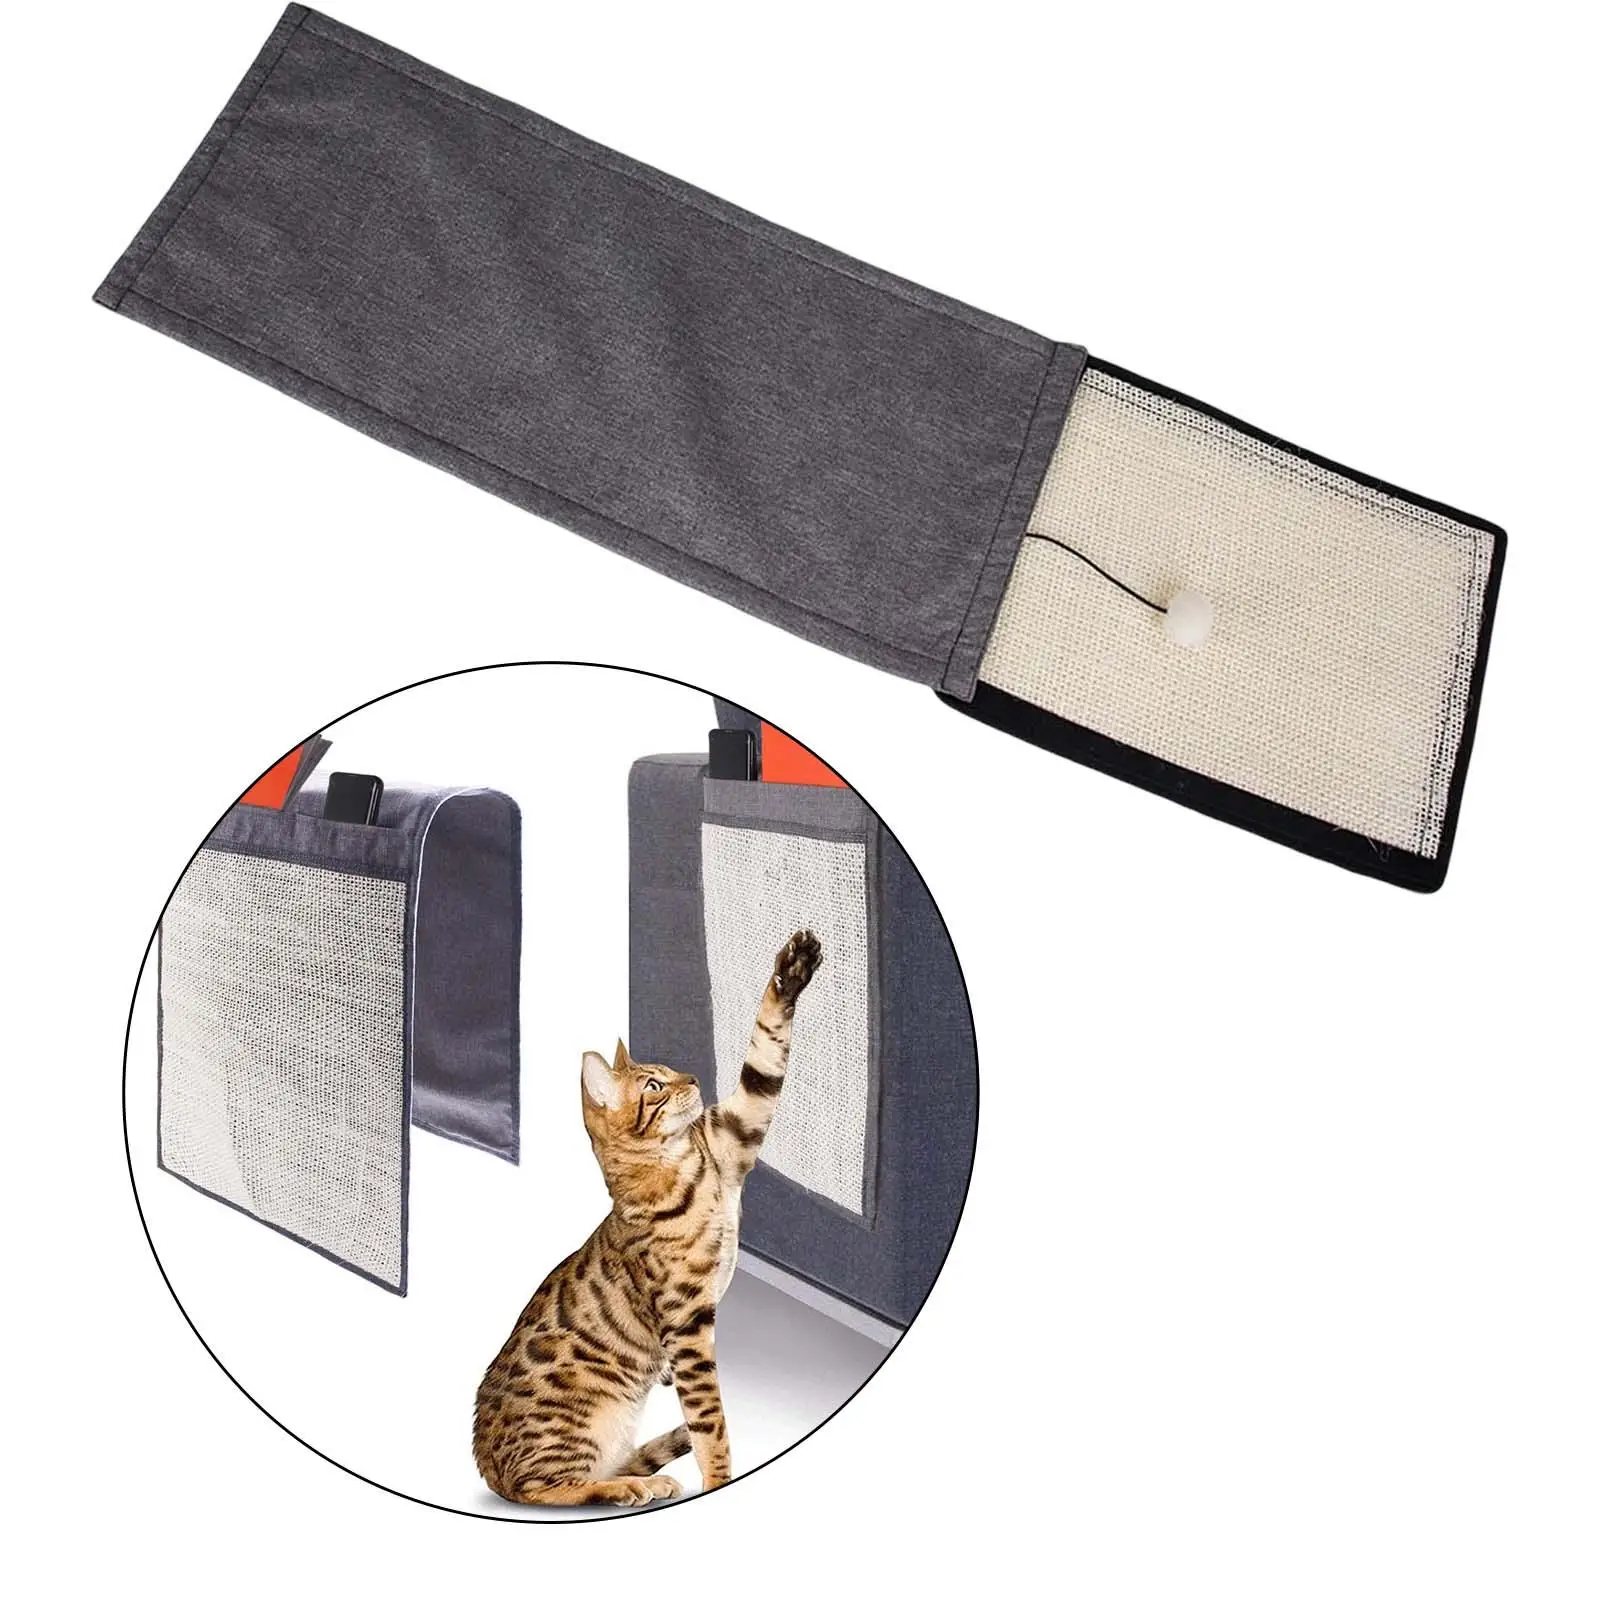 Durable Cat Scratching Mat Sisal Scratch Pad Creative Kitten Toy Interactive Board Safe to Use cat pet scratches post Kitten Bed